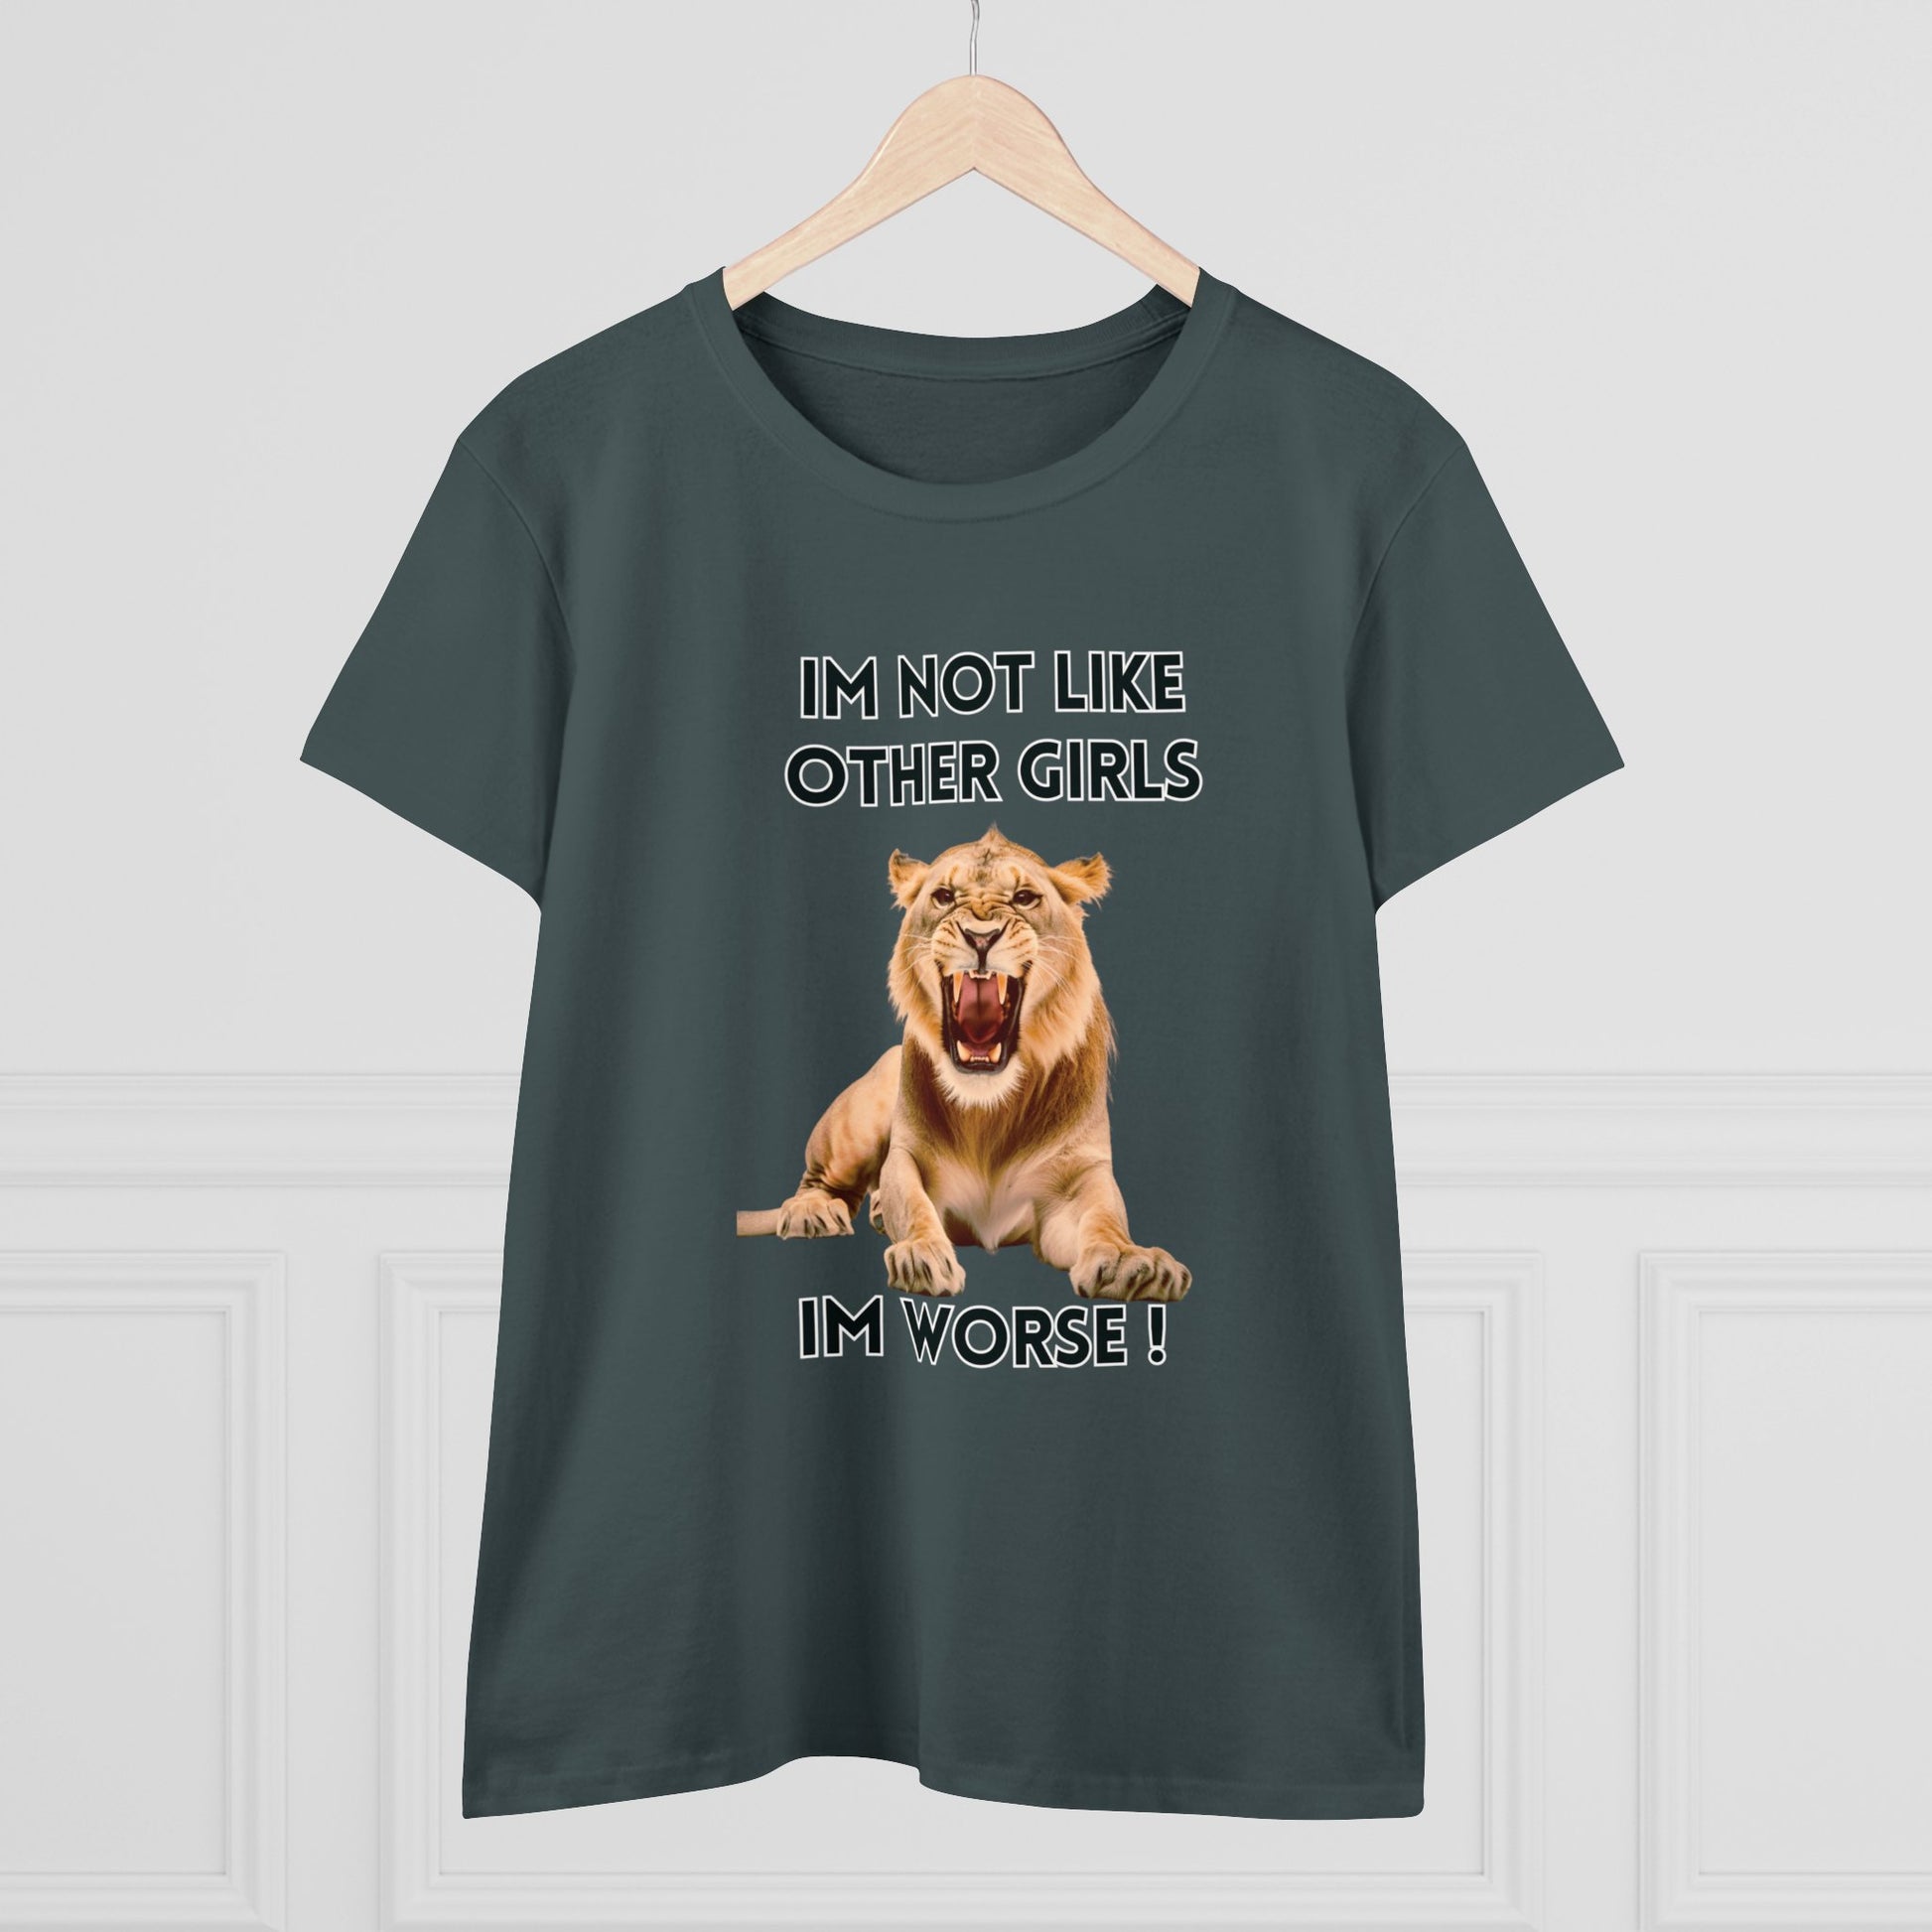 Angry Lion Funny T-Shirt - I'm Not Like Other Girls T-Shirt   